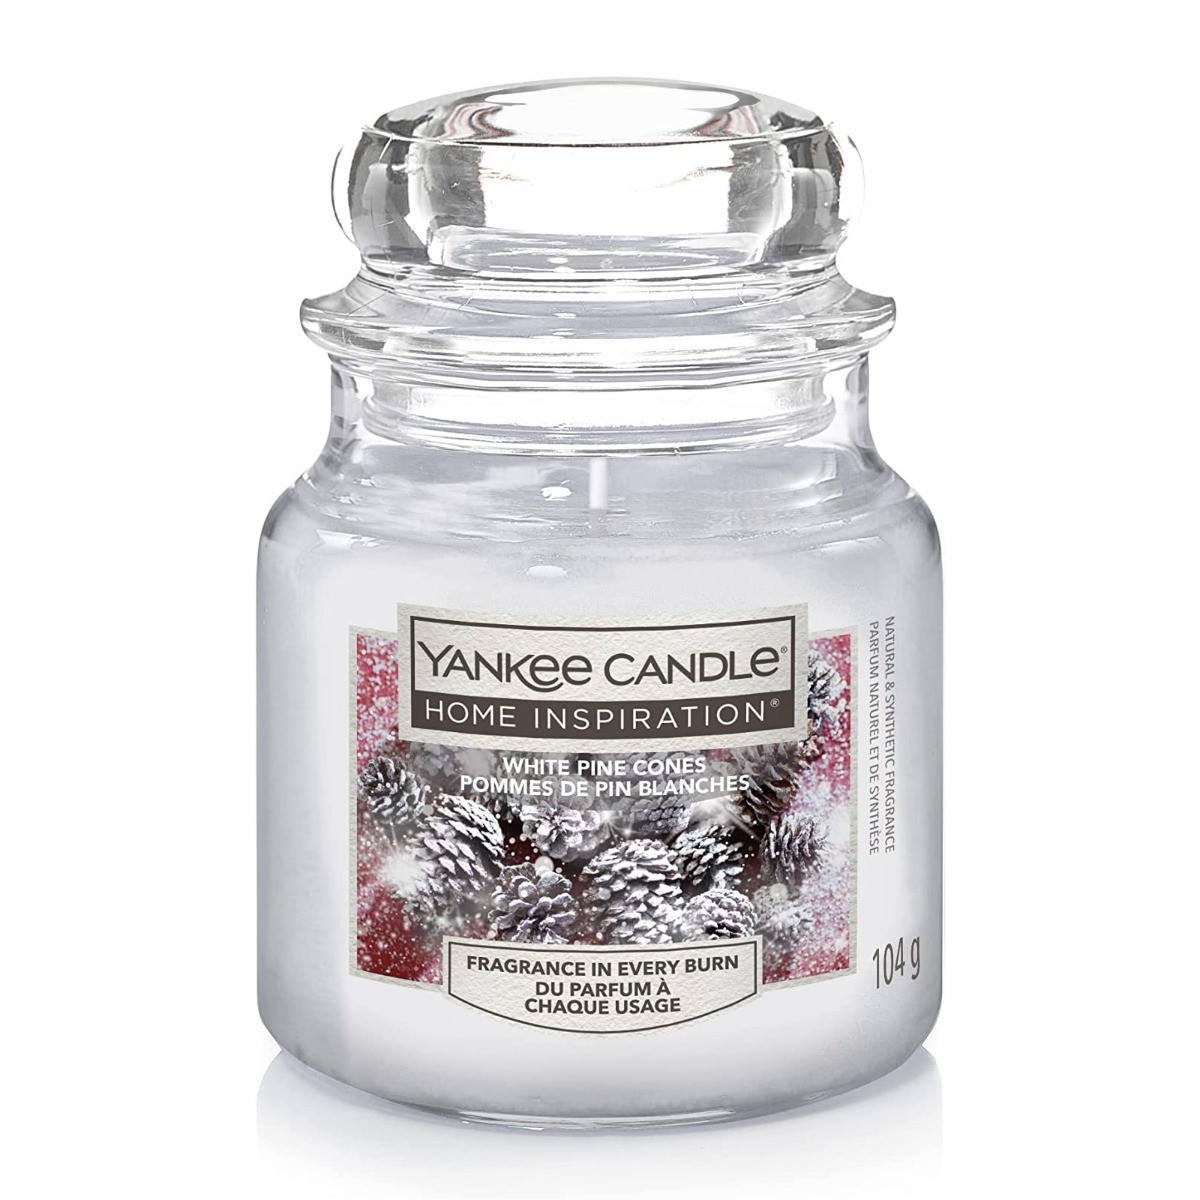 Yankee Candle Home Inspiration Small Jar - White Pine Cones>